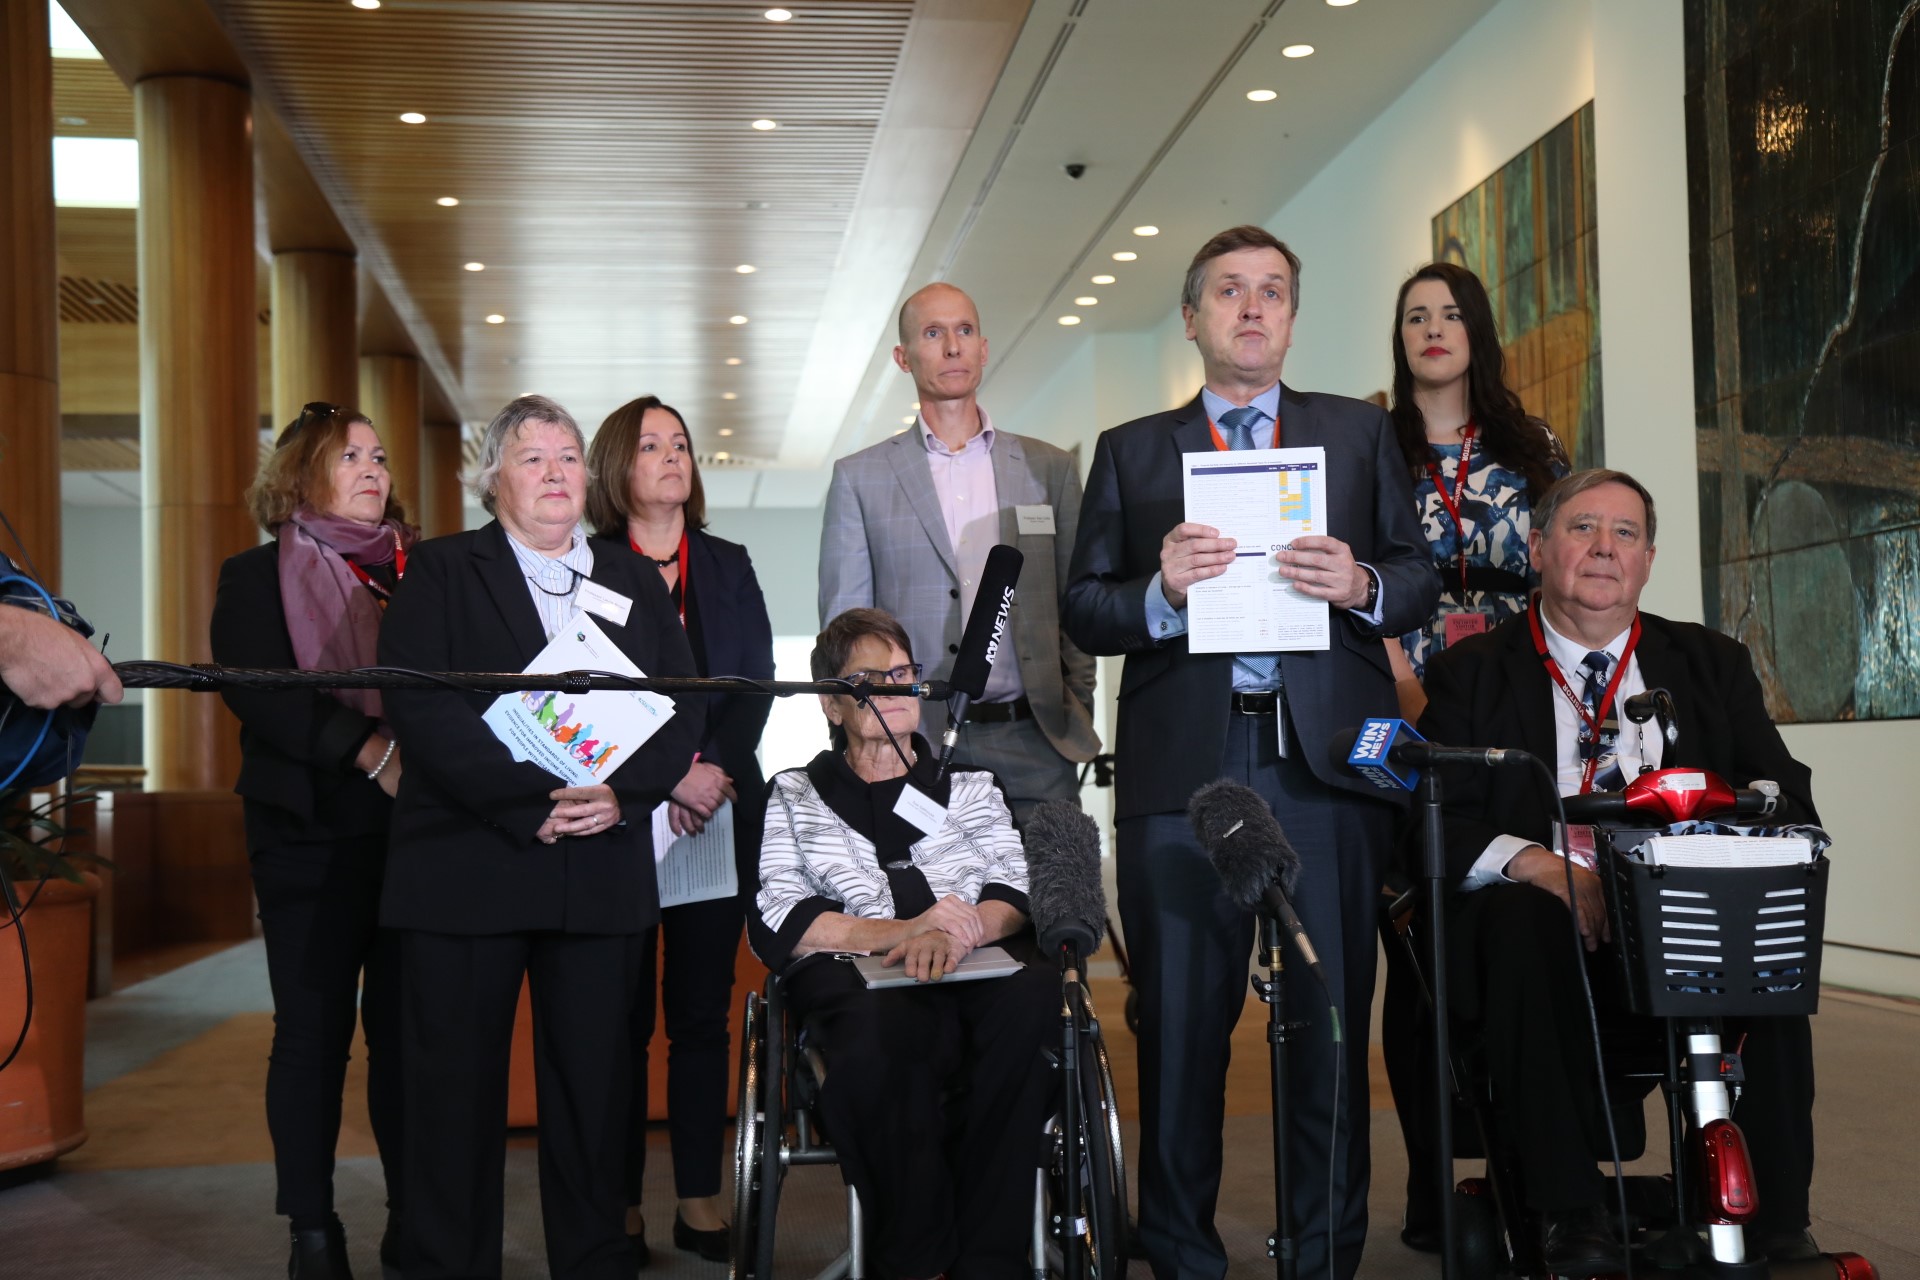 Disability advocates and researchers launching the three DSP Reports at Parliament House. Group image.